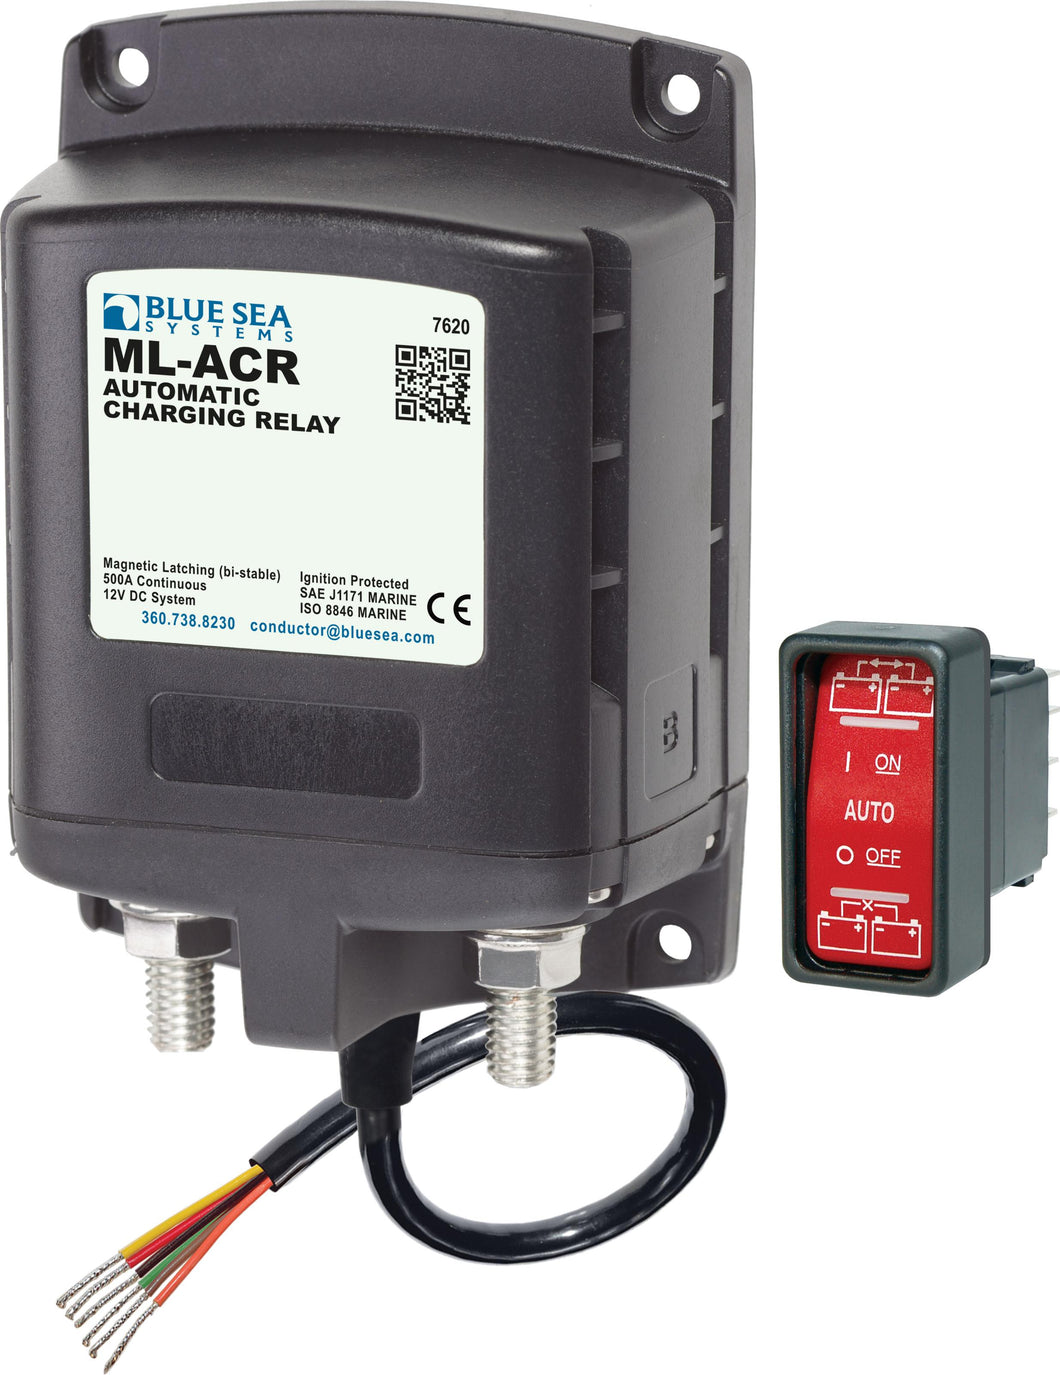 Blue Sea Ml-acr Automatic Charging Relay 12vdc 500a